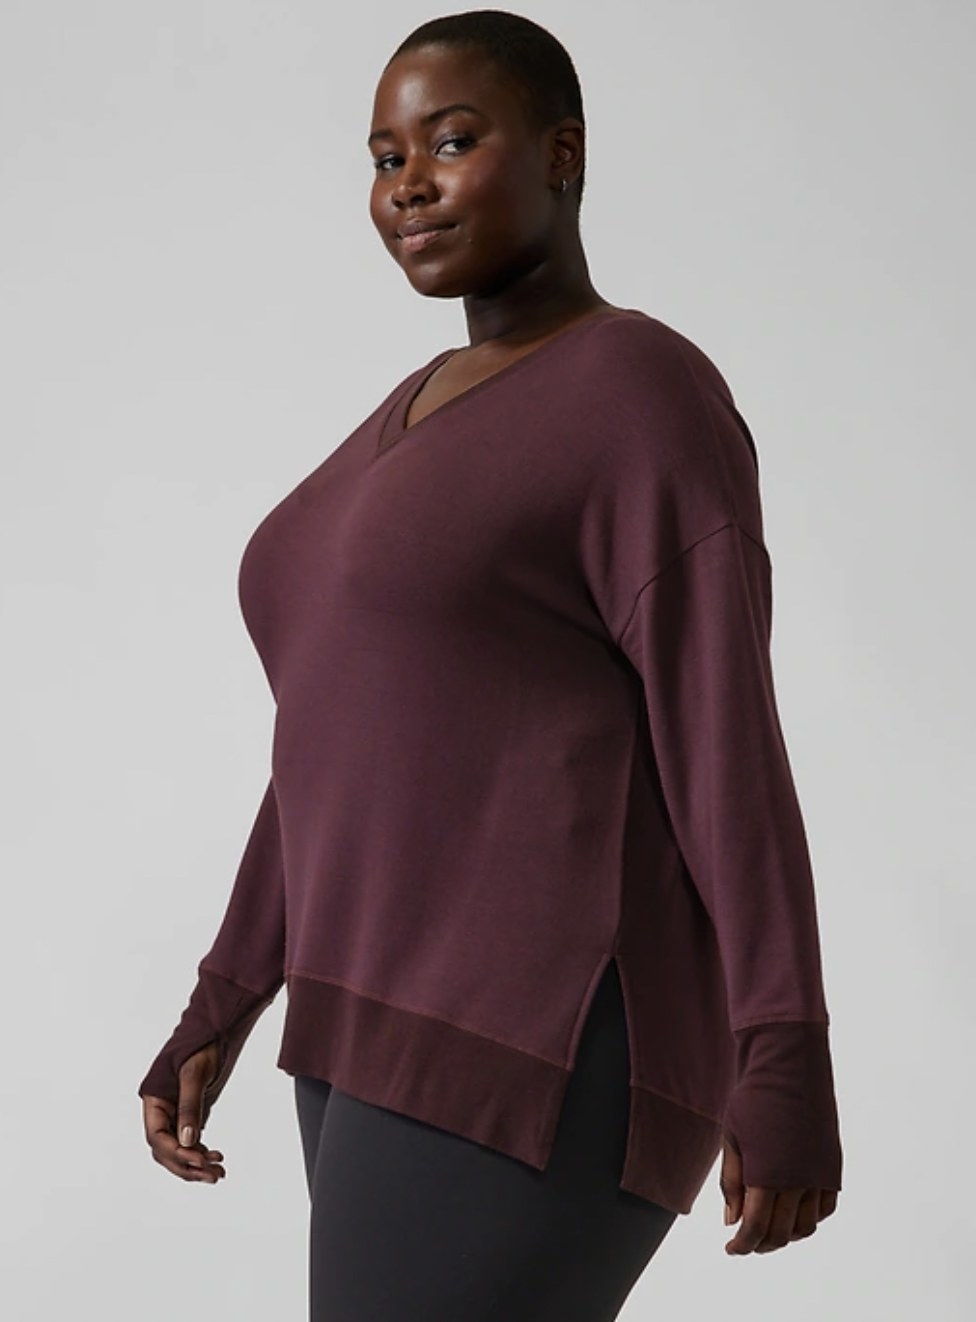 Model wearing the deep red v-neck sweater with thumbholes